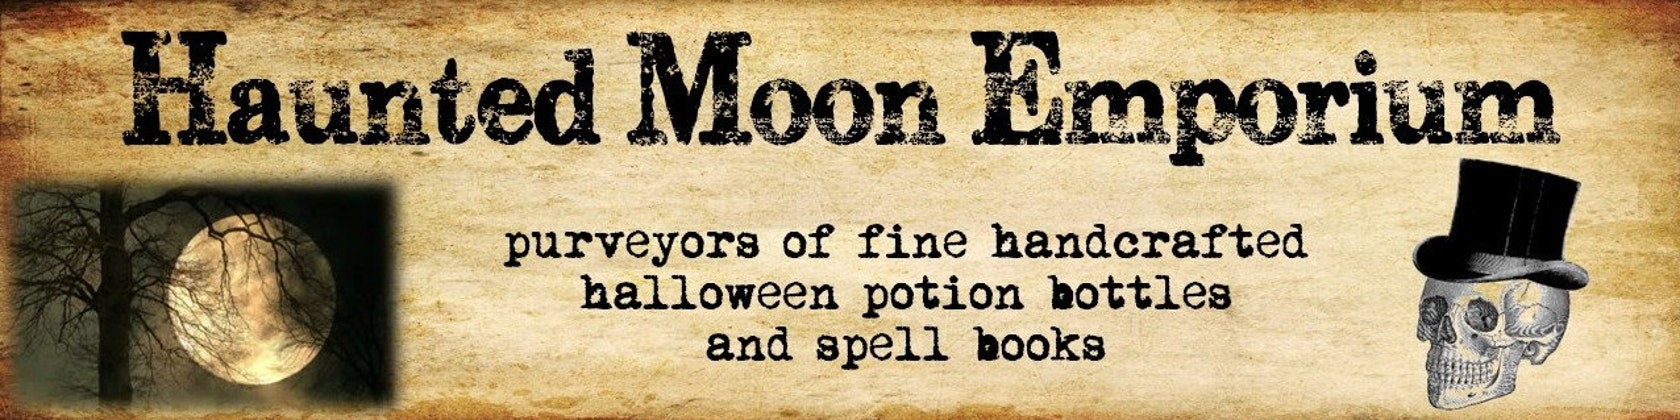 Moon spell cookies - Les Petits Chaudrons